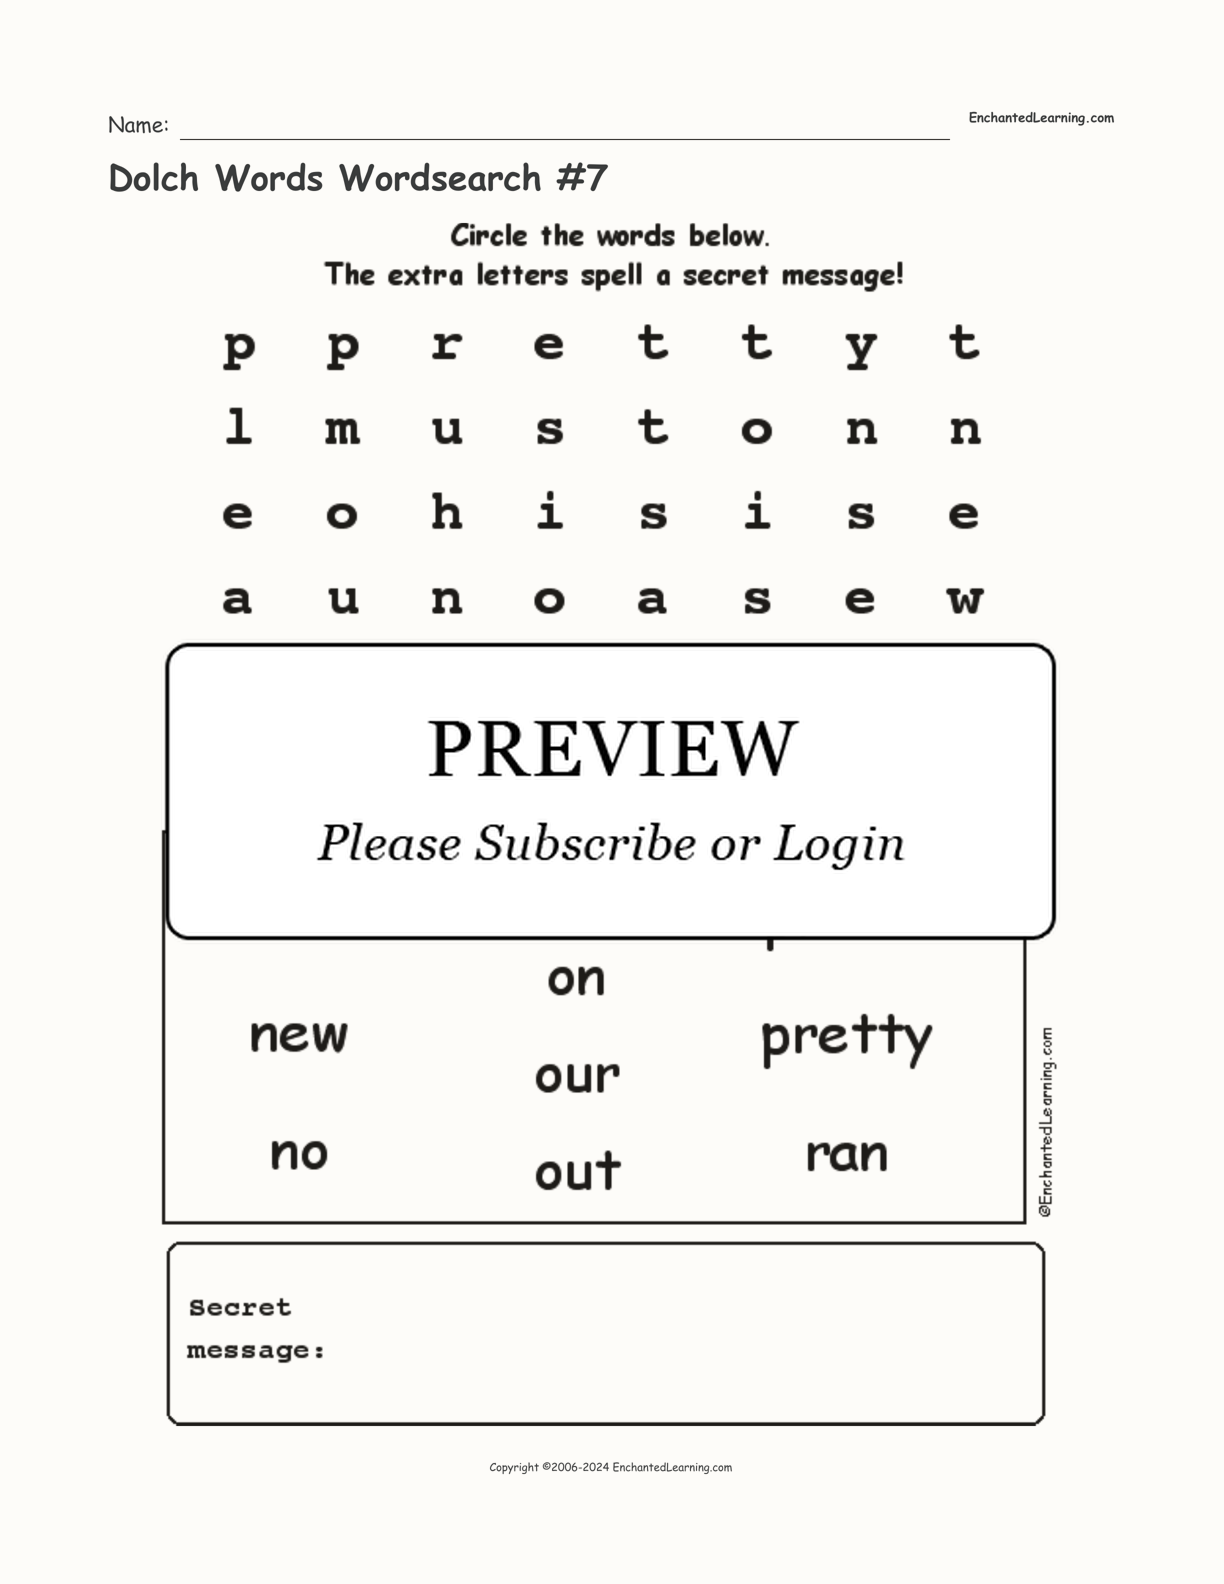 Dolch Words Wordsearch #7 interactive worksheet page 1